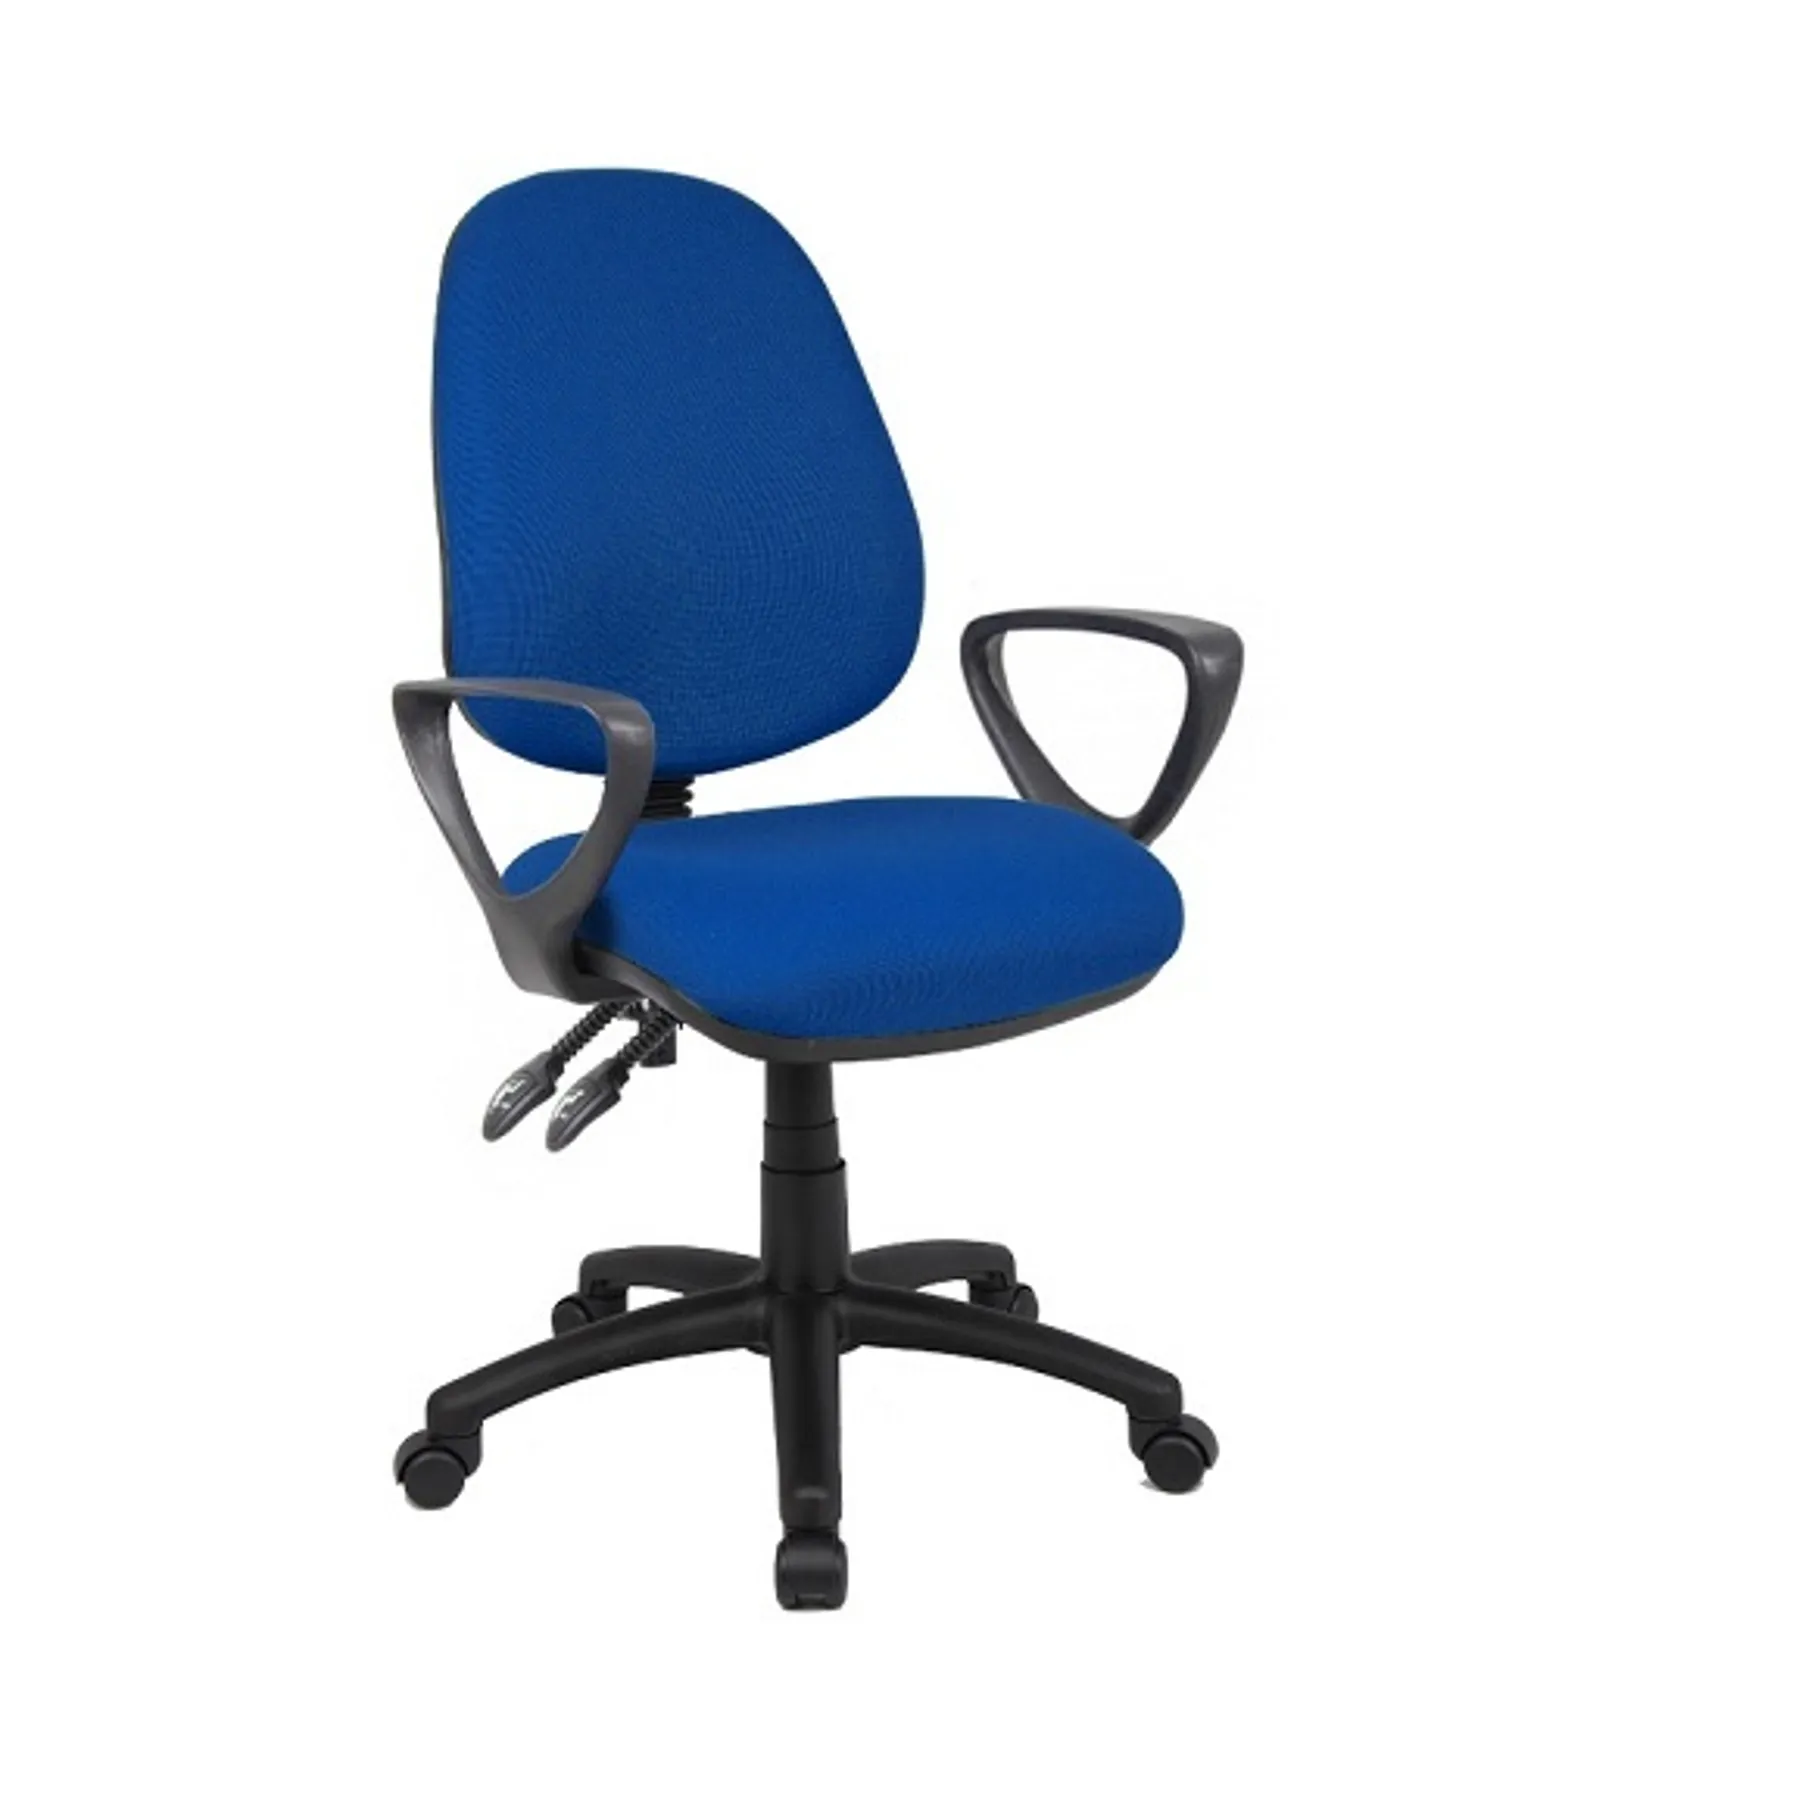 Lof direct dams vantage 100 operator chair with fixed arms V101 00 B 2